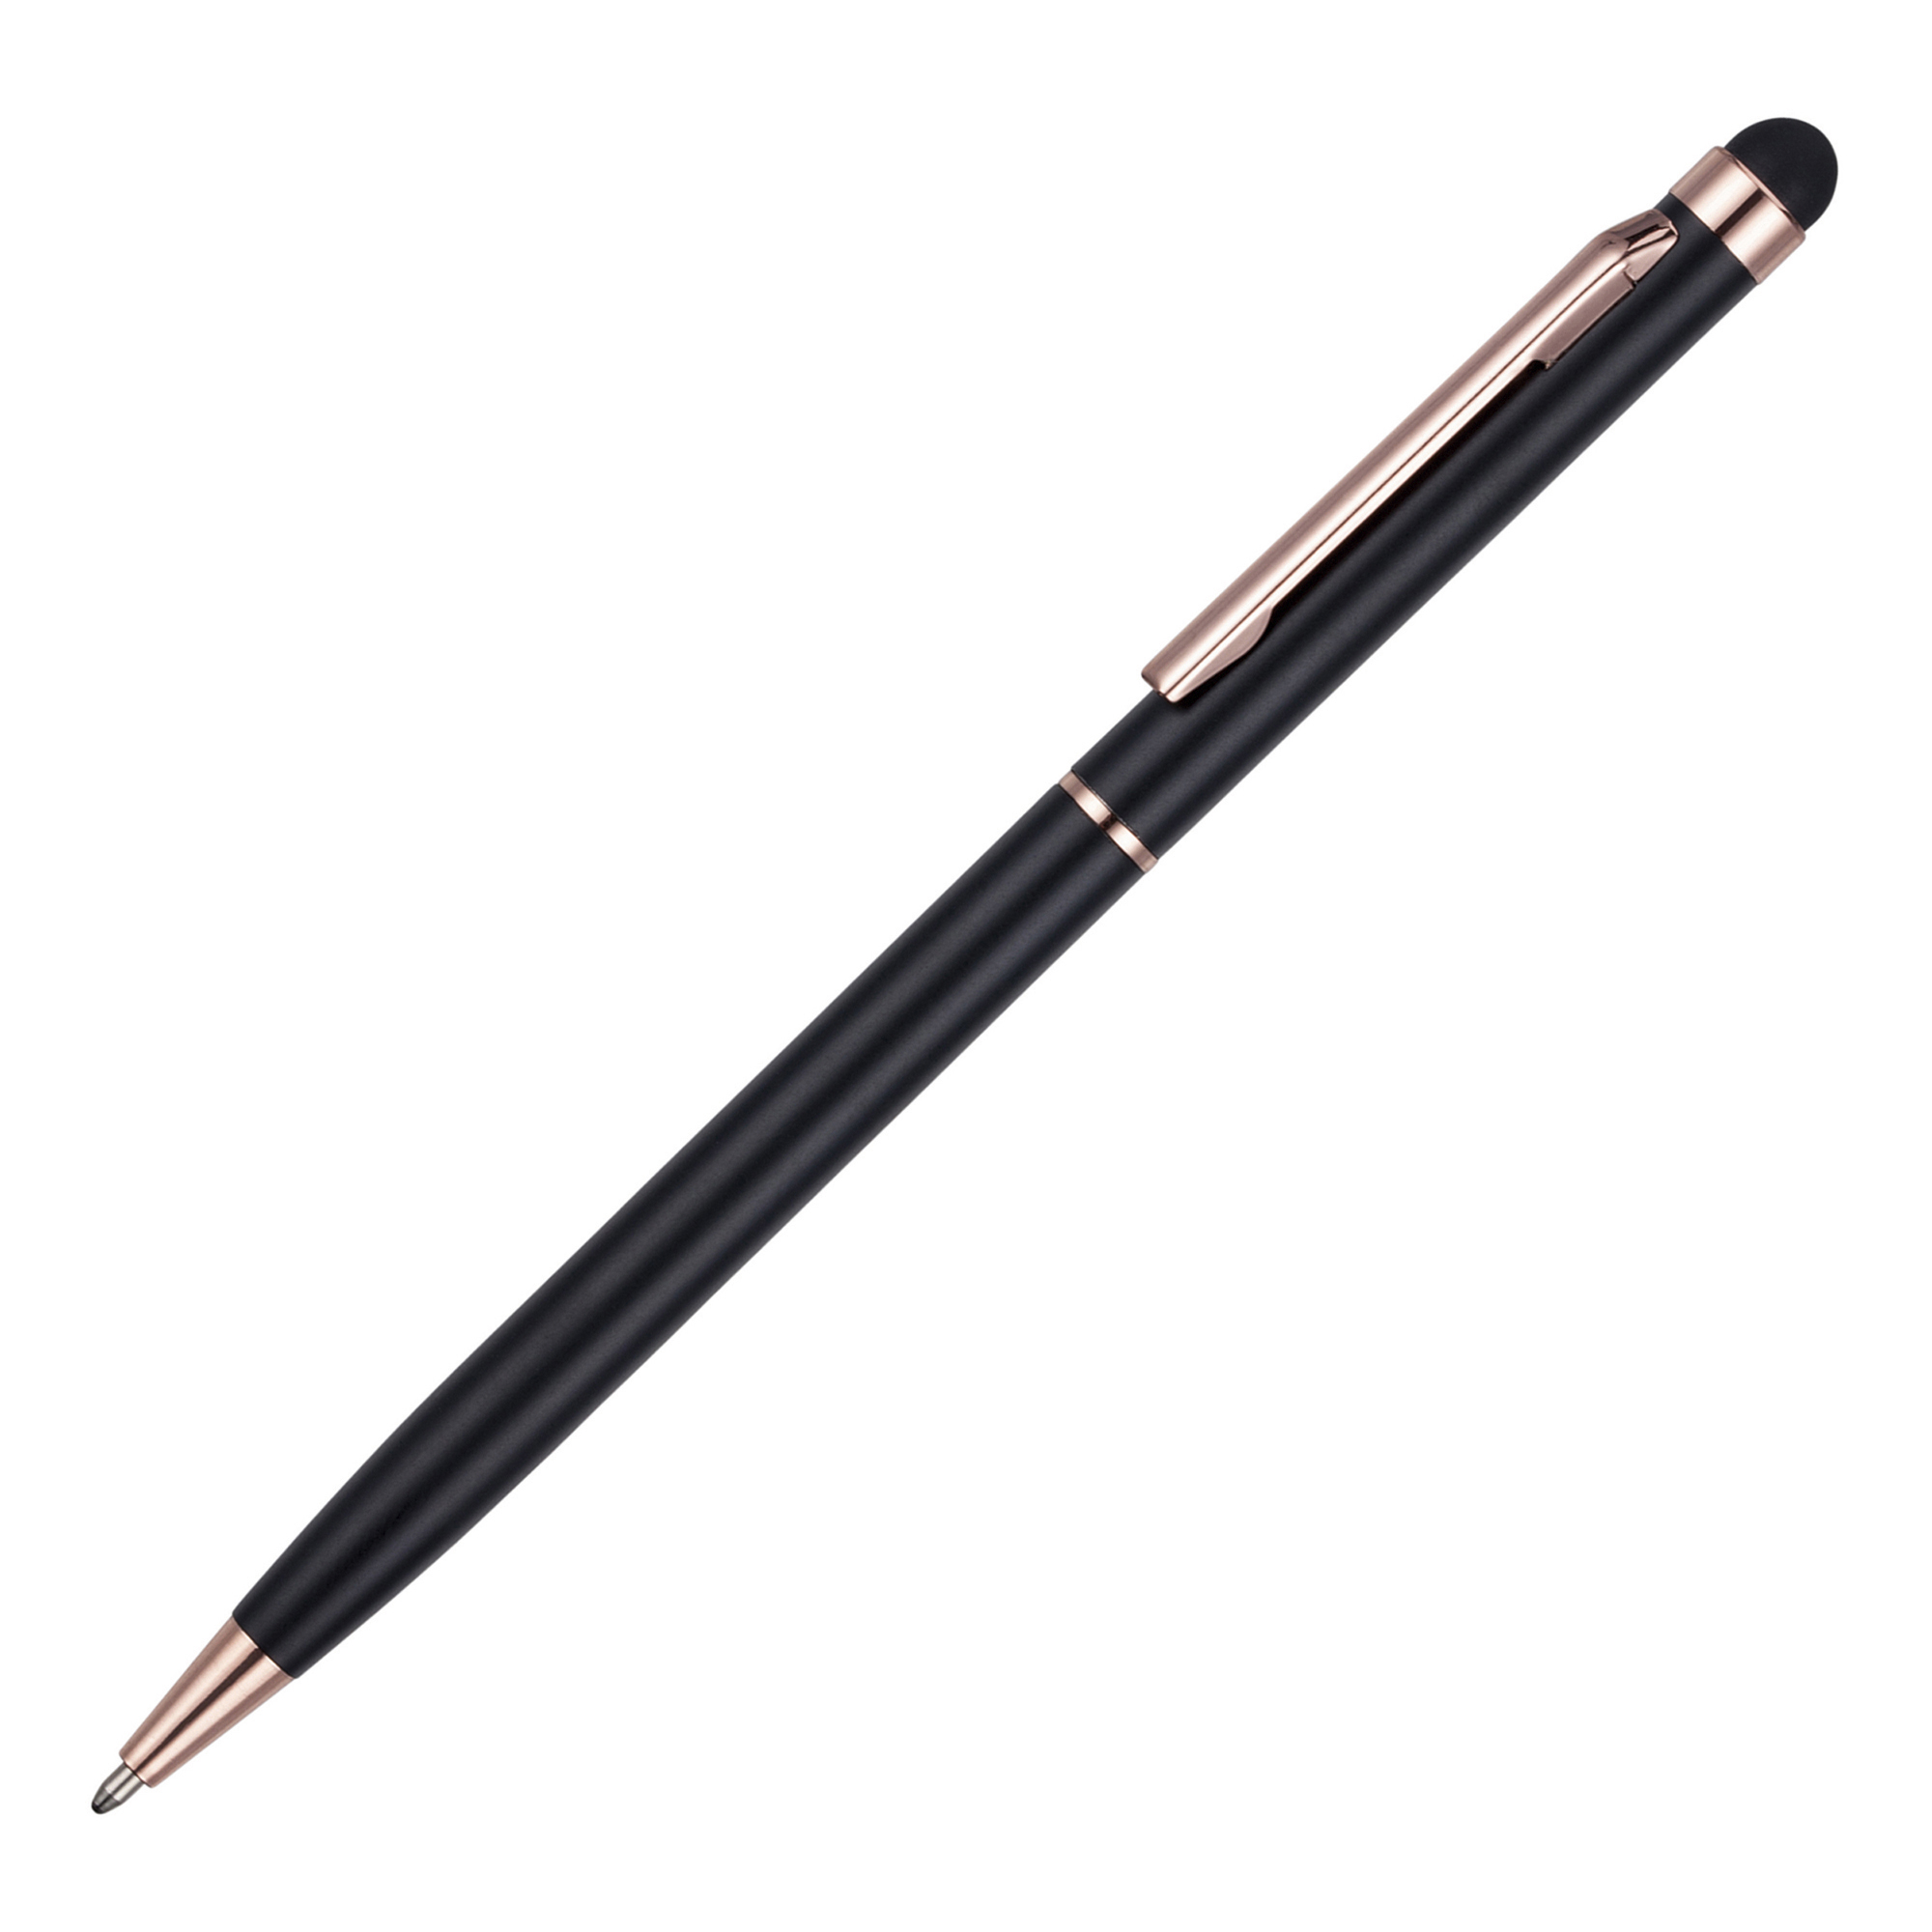 An elegant, slim twist action ball pen with a soft stylus at one end for use on all those soft touch devices. The on trend rose gold trim can be partnered with our specially formulated rose gold print for a truly beautiful finish!